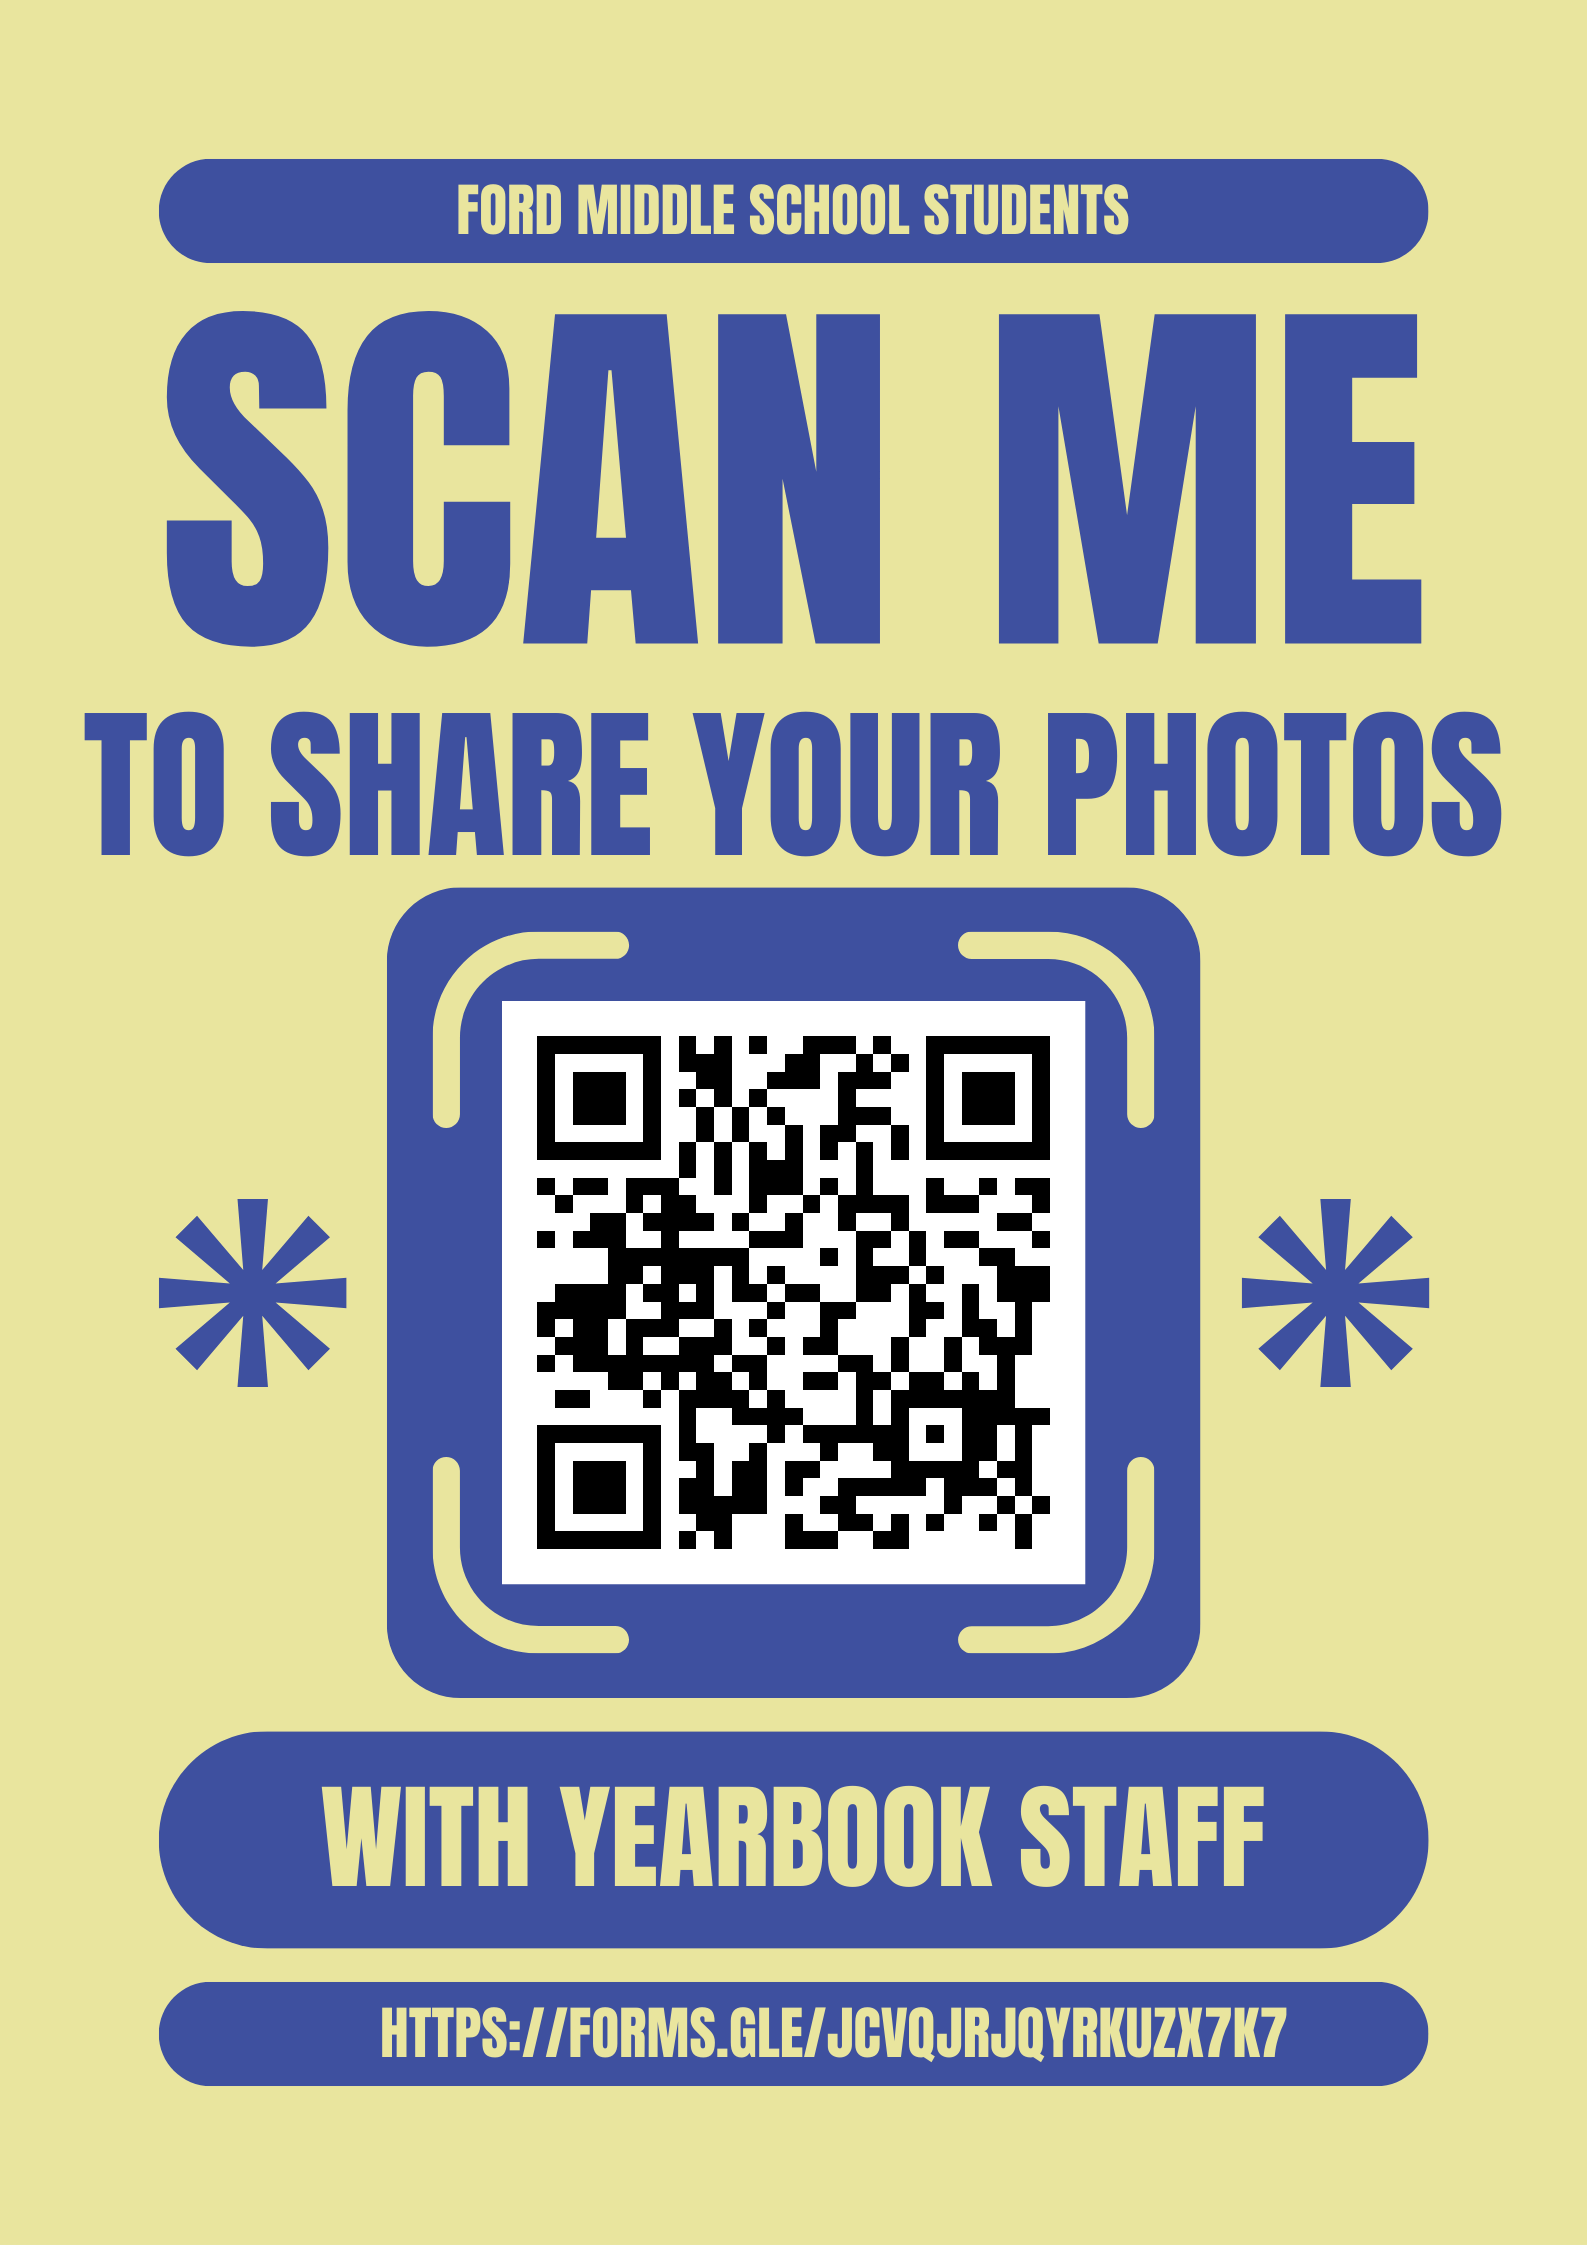 Share your photos with the yearbook staff